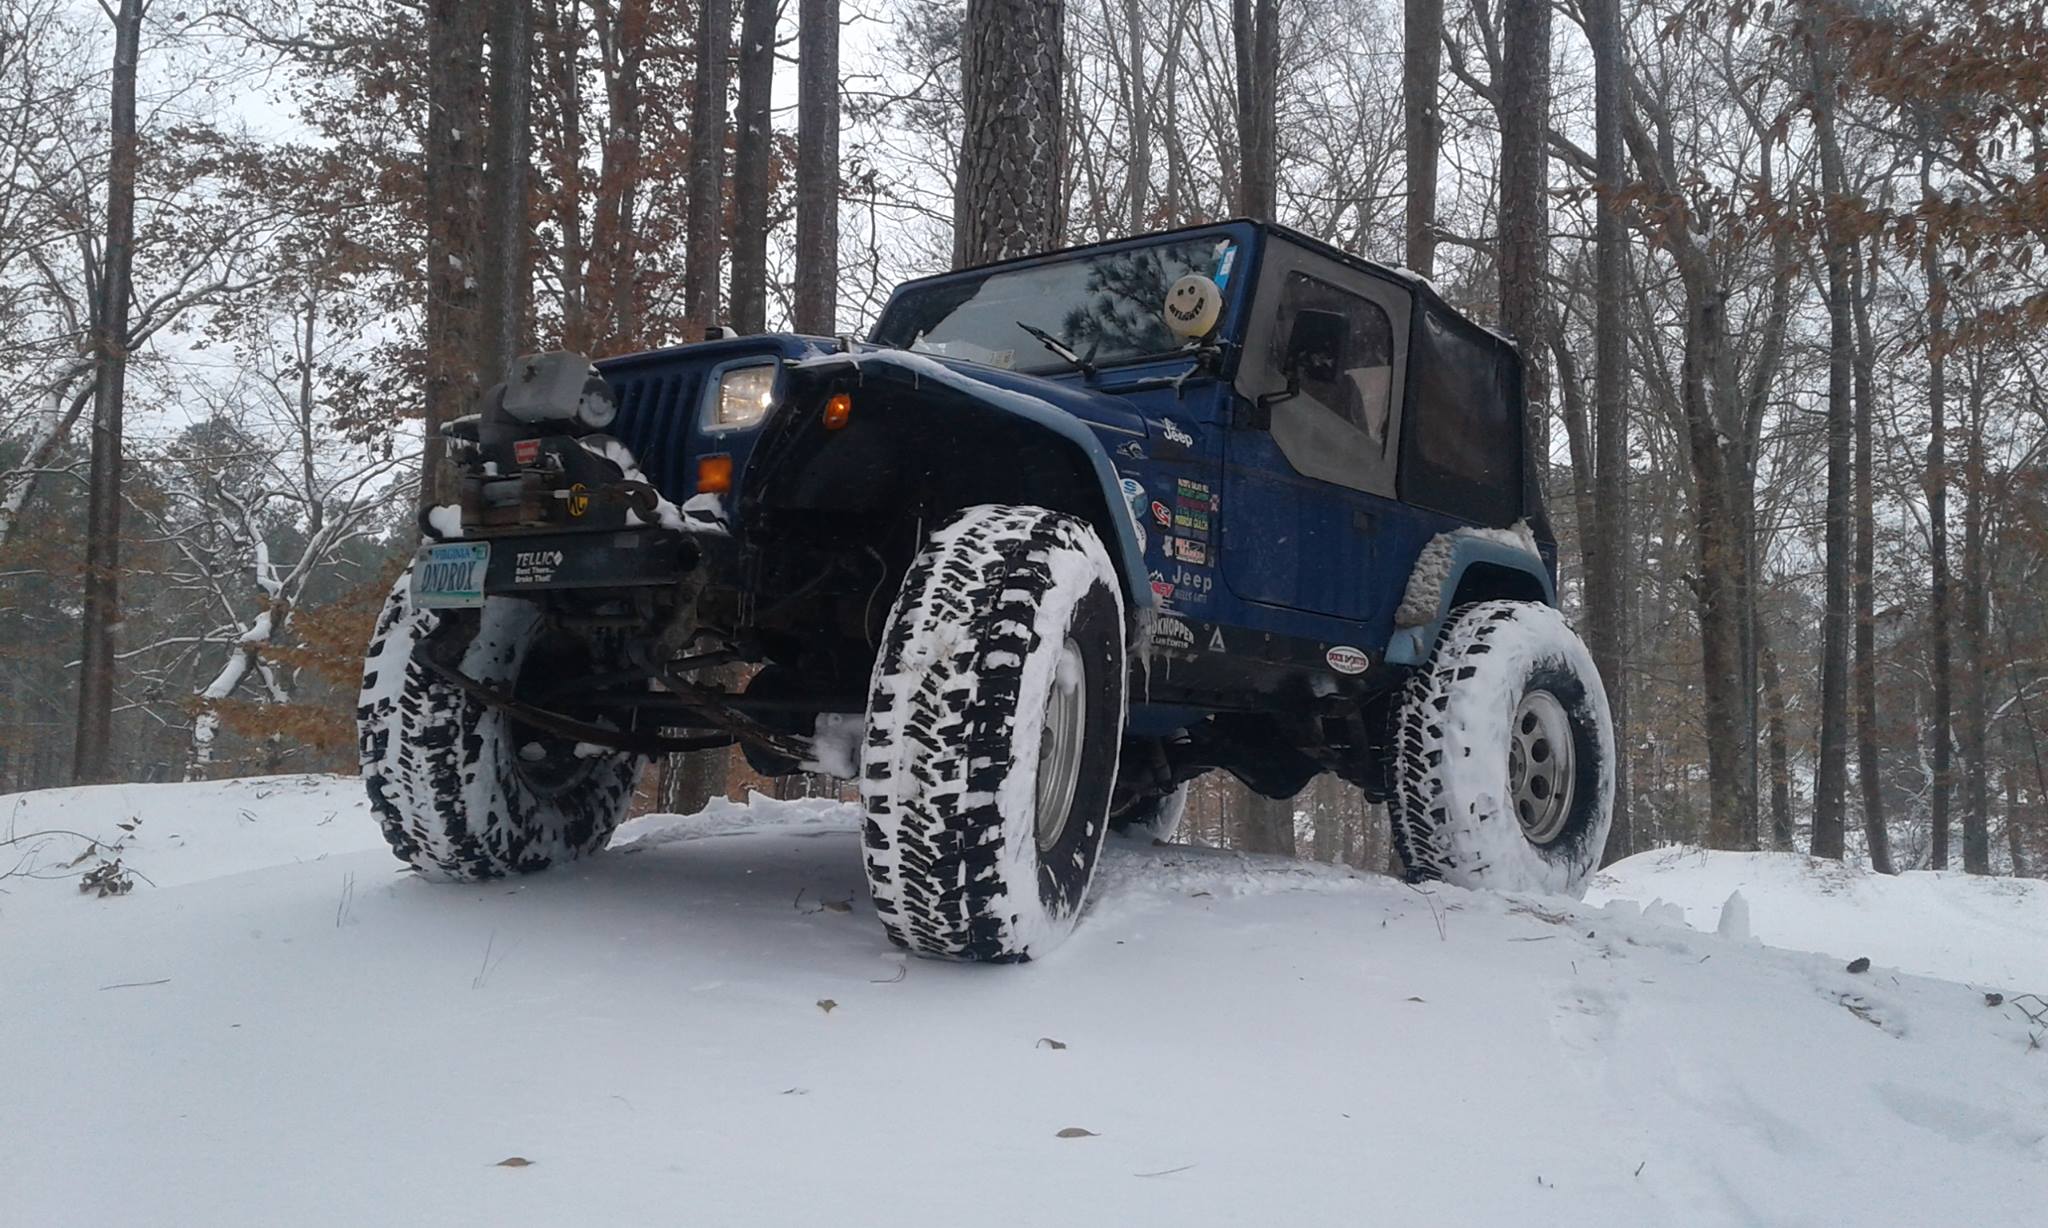 Tommy's 1996 Jeep Wrangler YJ in the snow